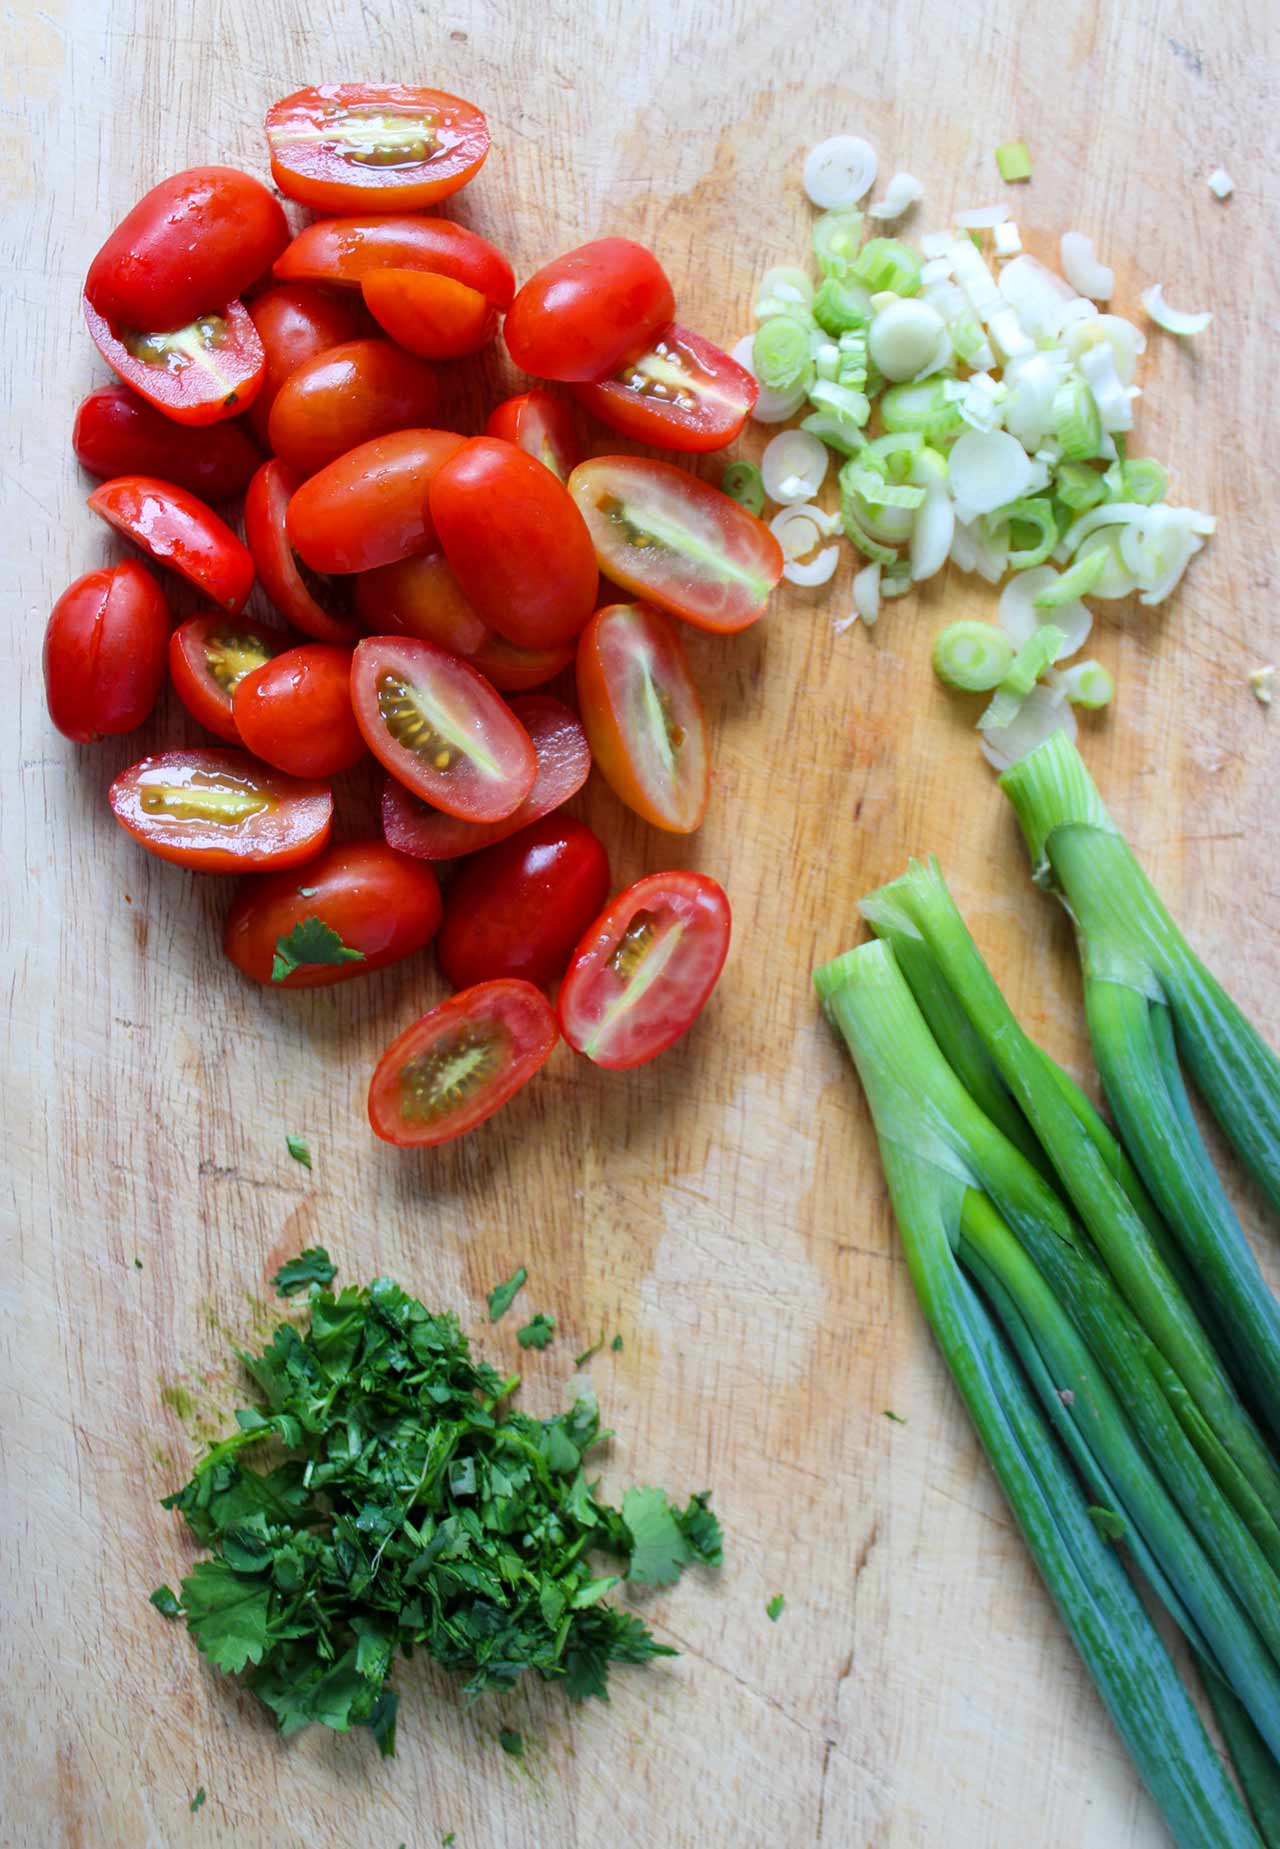 Chopped green onions, tomatoes, and cilantro chopped and sliced on a cutting board.